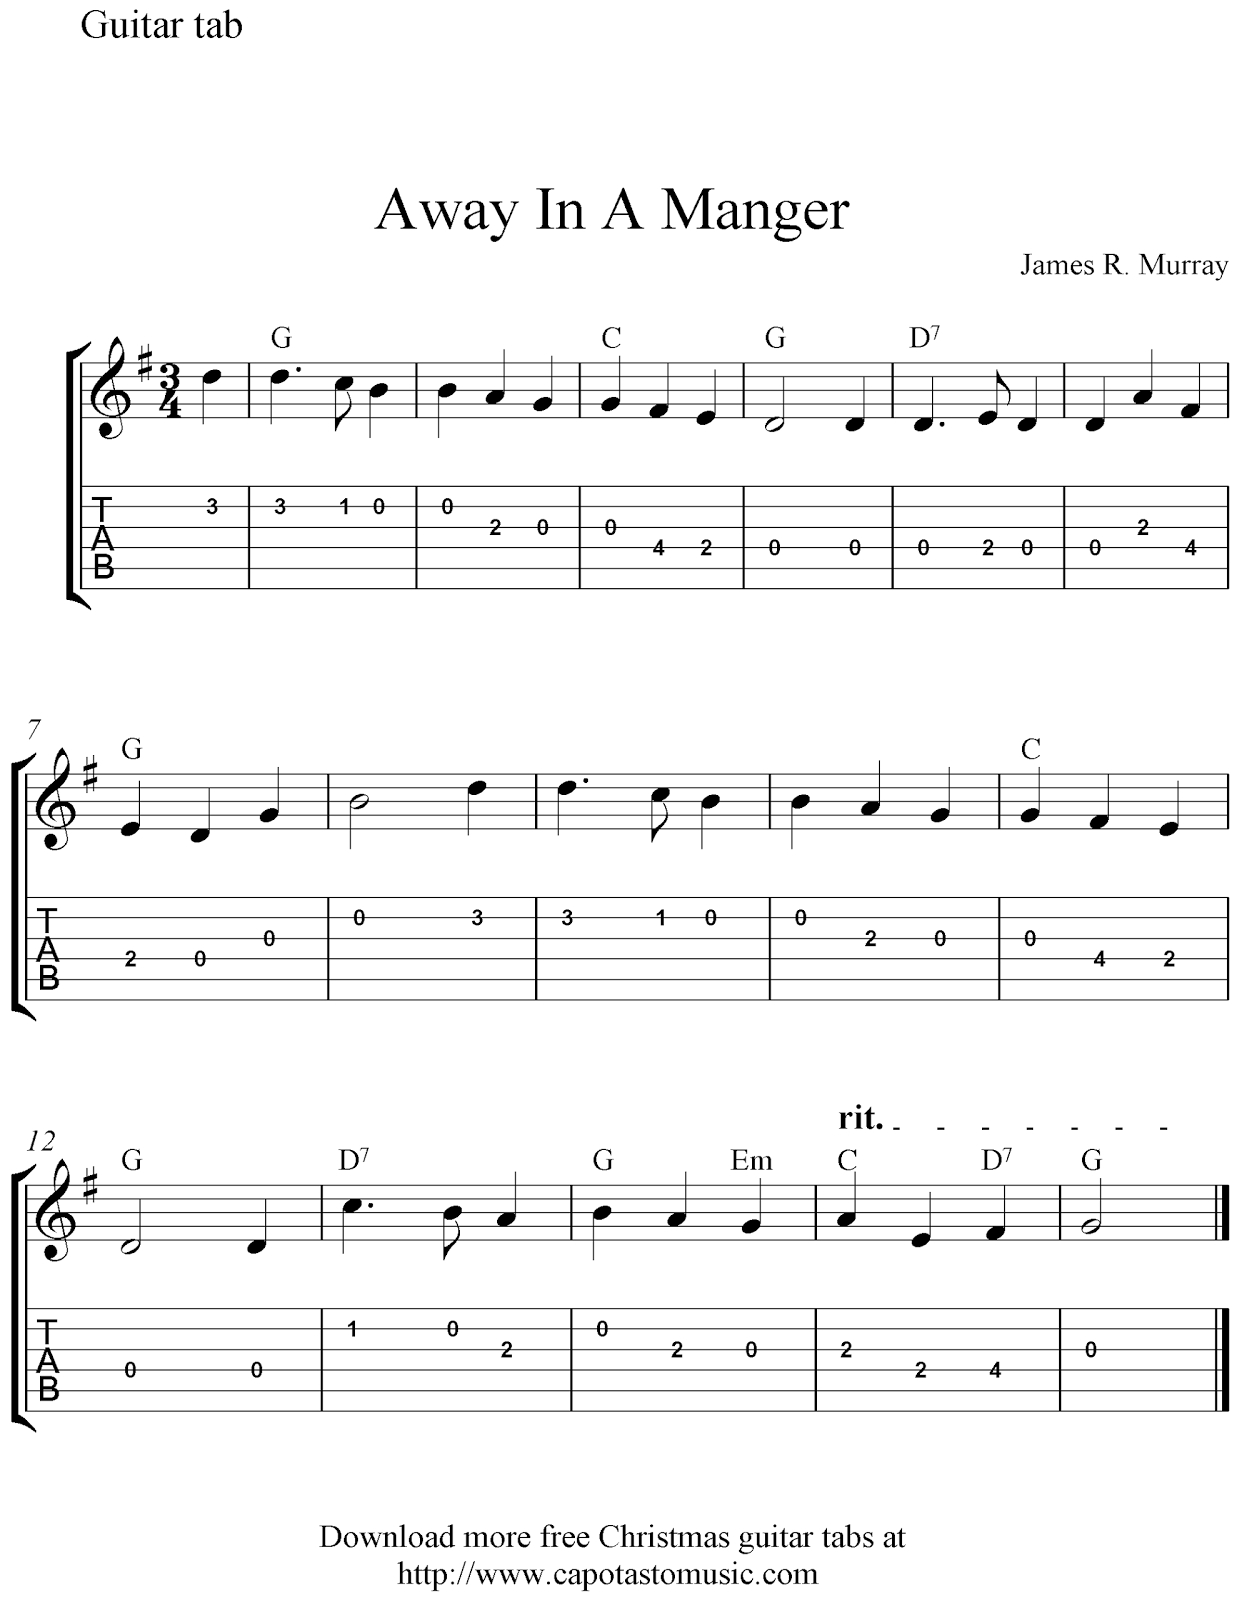 On This Site You Can Download Free Printable Sheet Music Scores And - Free Printable Guitar Music